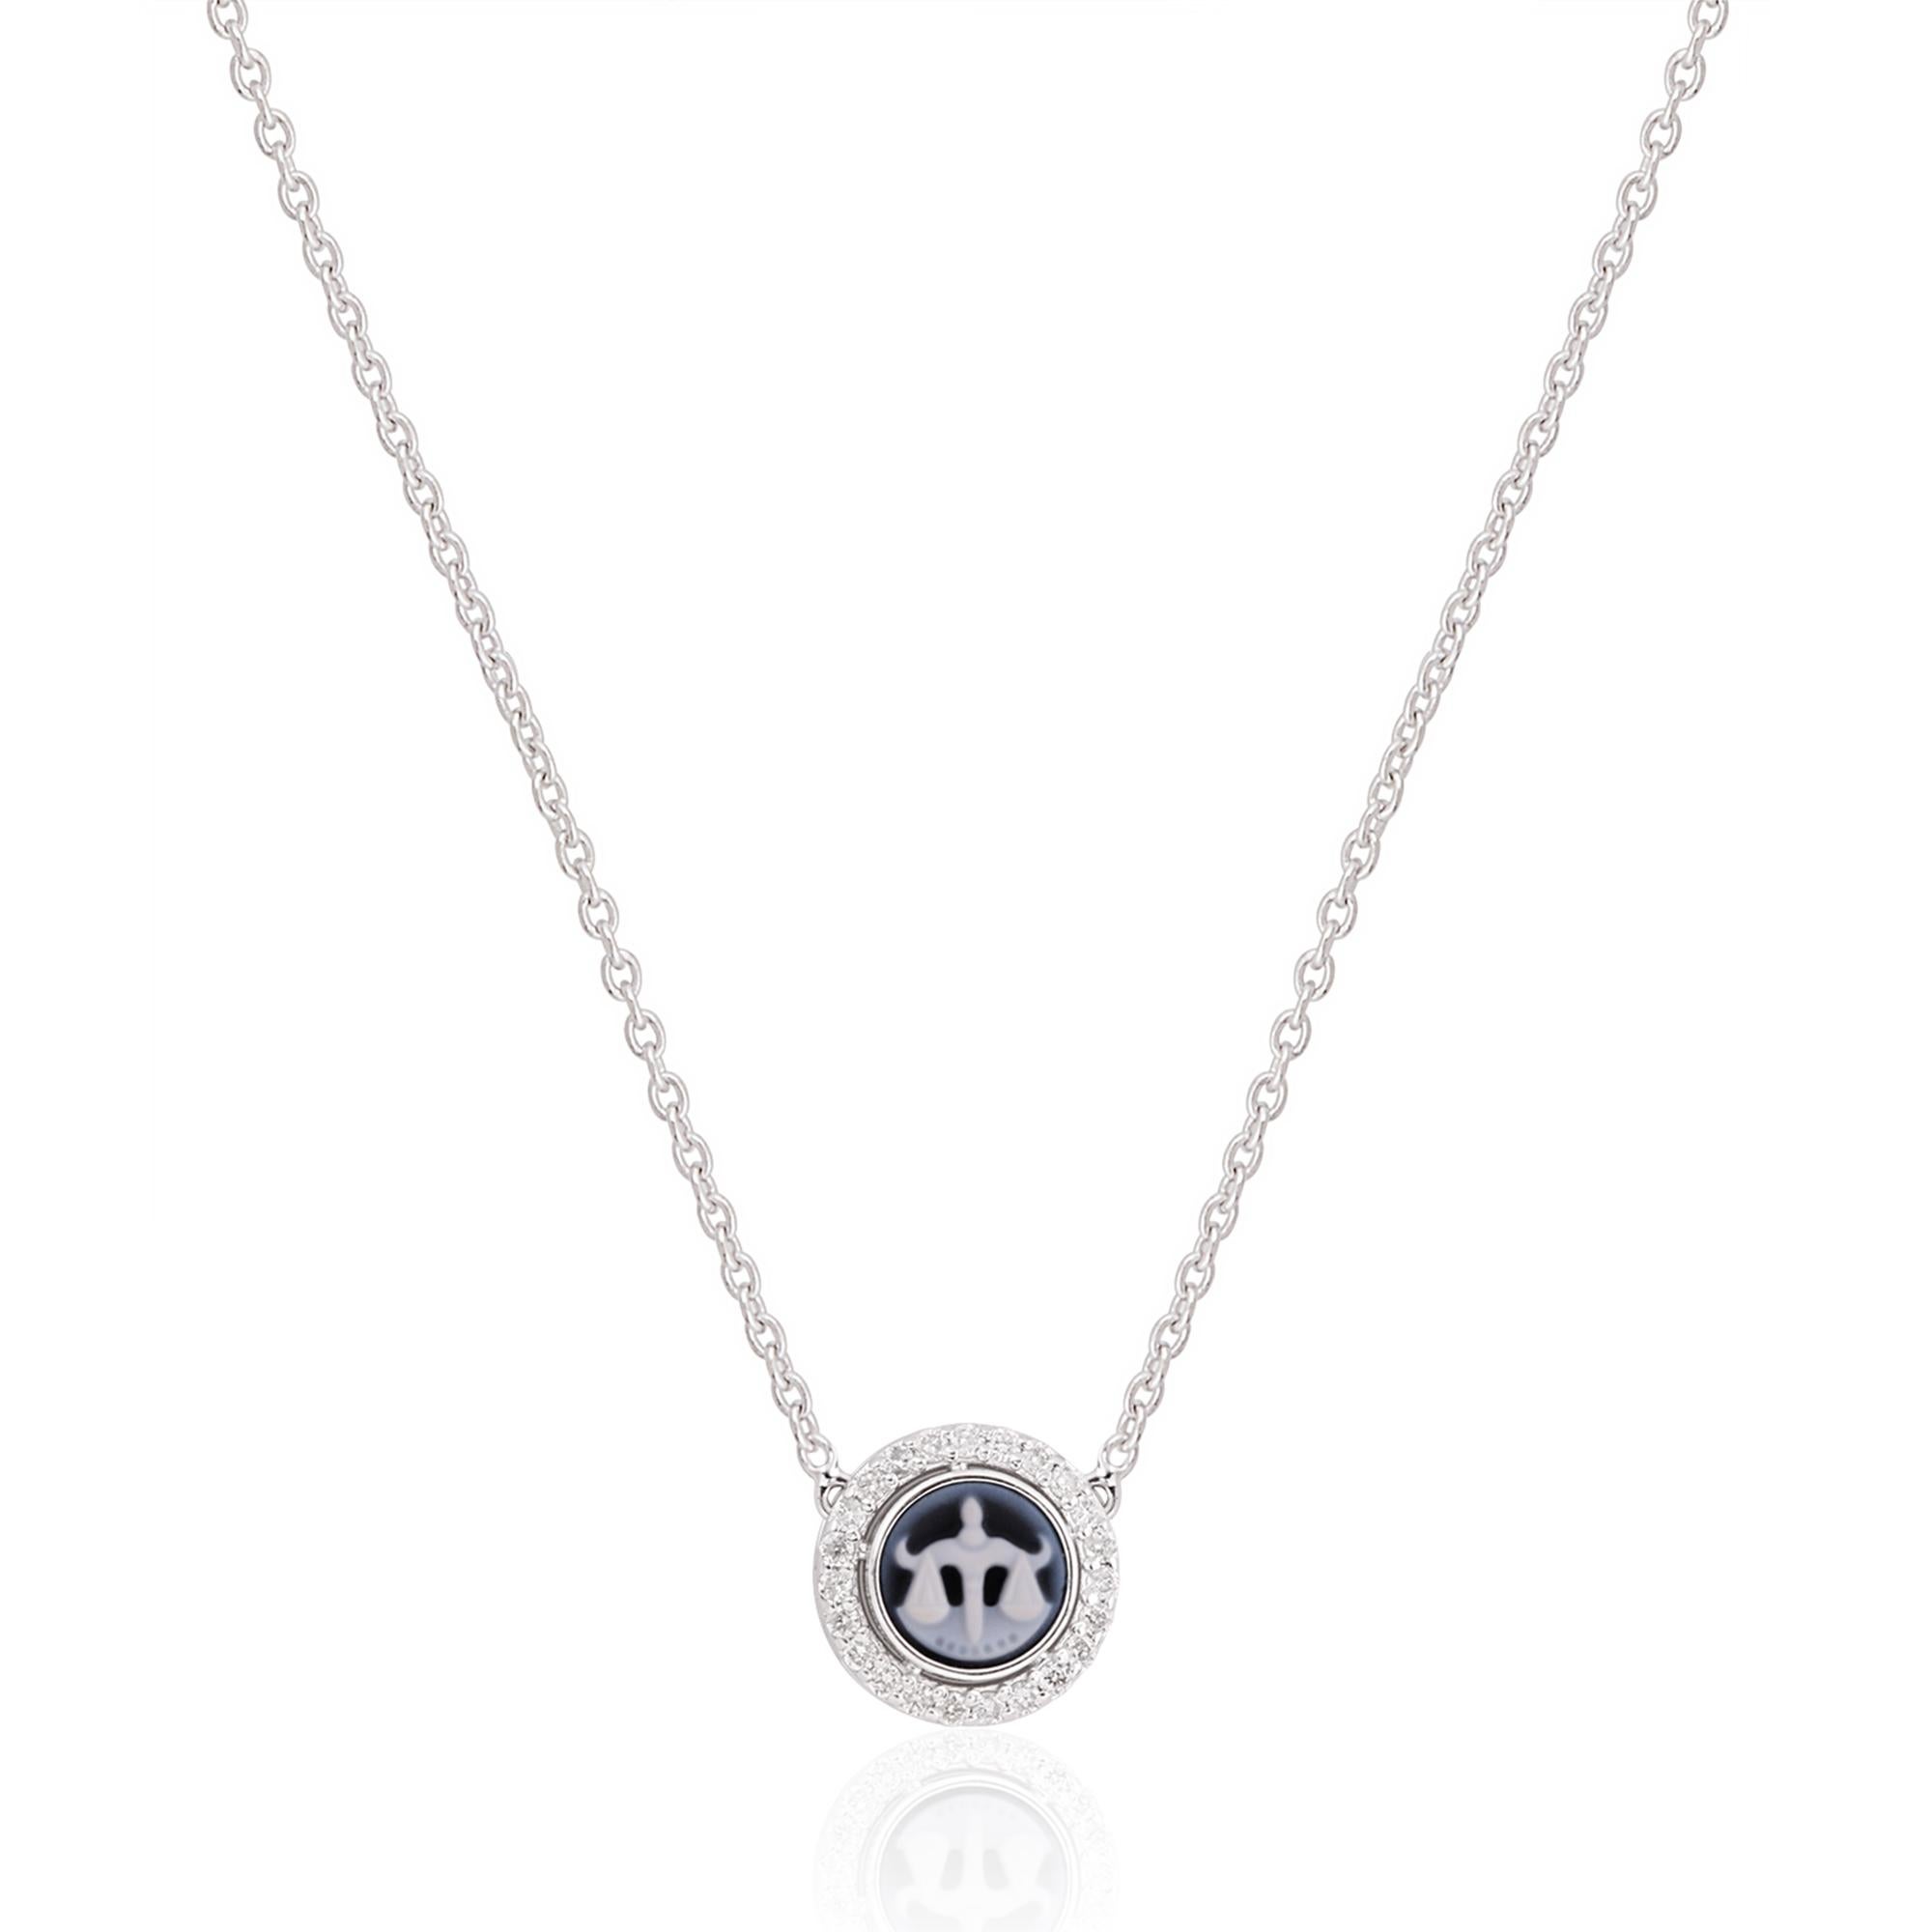 Celebrate your astrological identity with this exquisite Libra zodiac sign charm necklace. With its diamond pave, 14-karat white gold craftsmanship, and intricate design, it is a stunning representation of your Libra pride and celestial